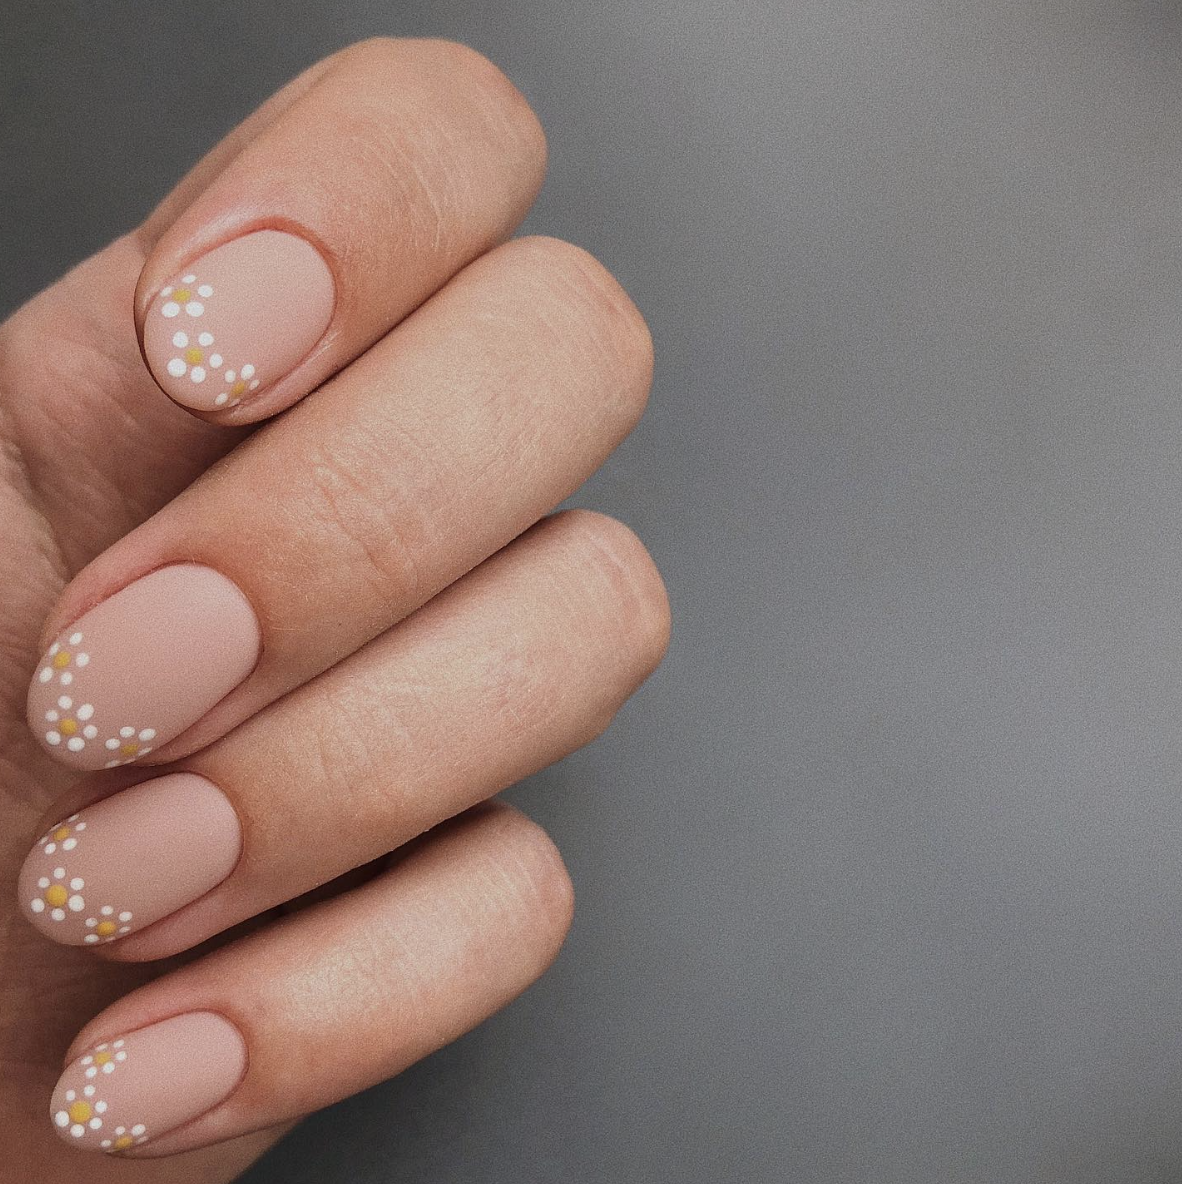 Gemini will look good with daisies on their nails.